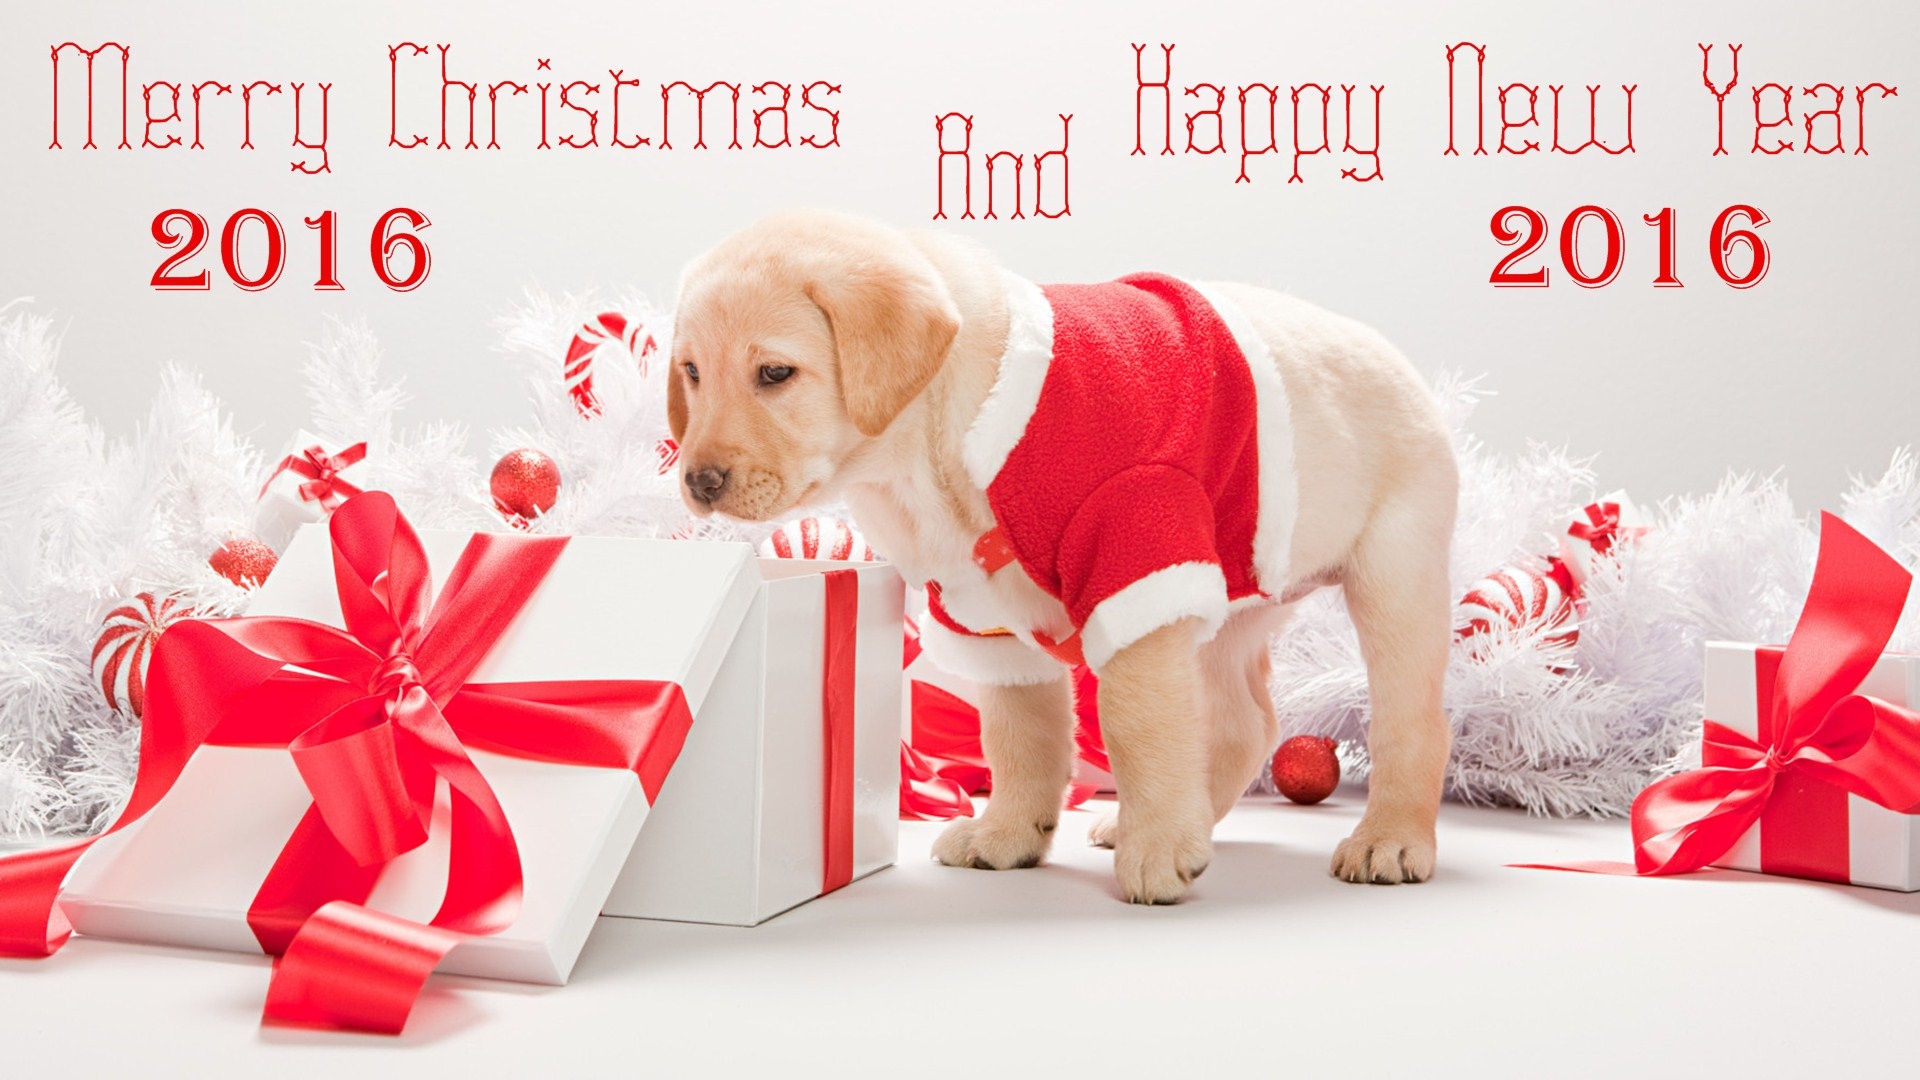 Merry Christmas And Happy New Year 2015 Wallpapers